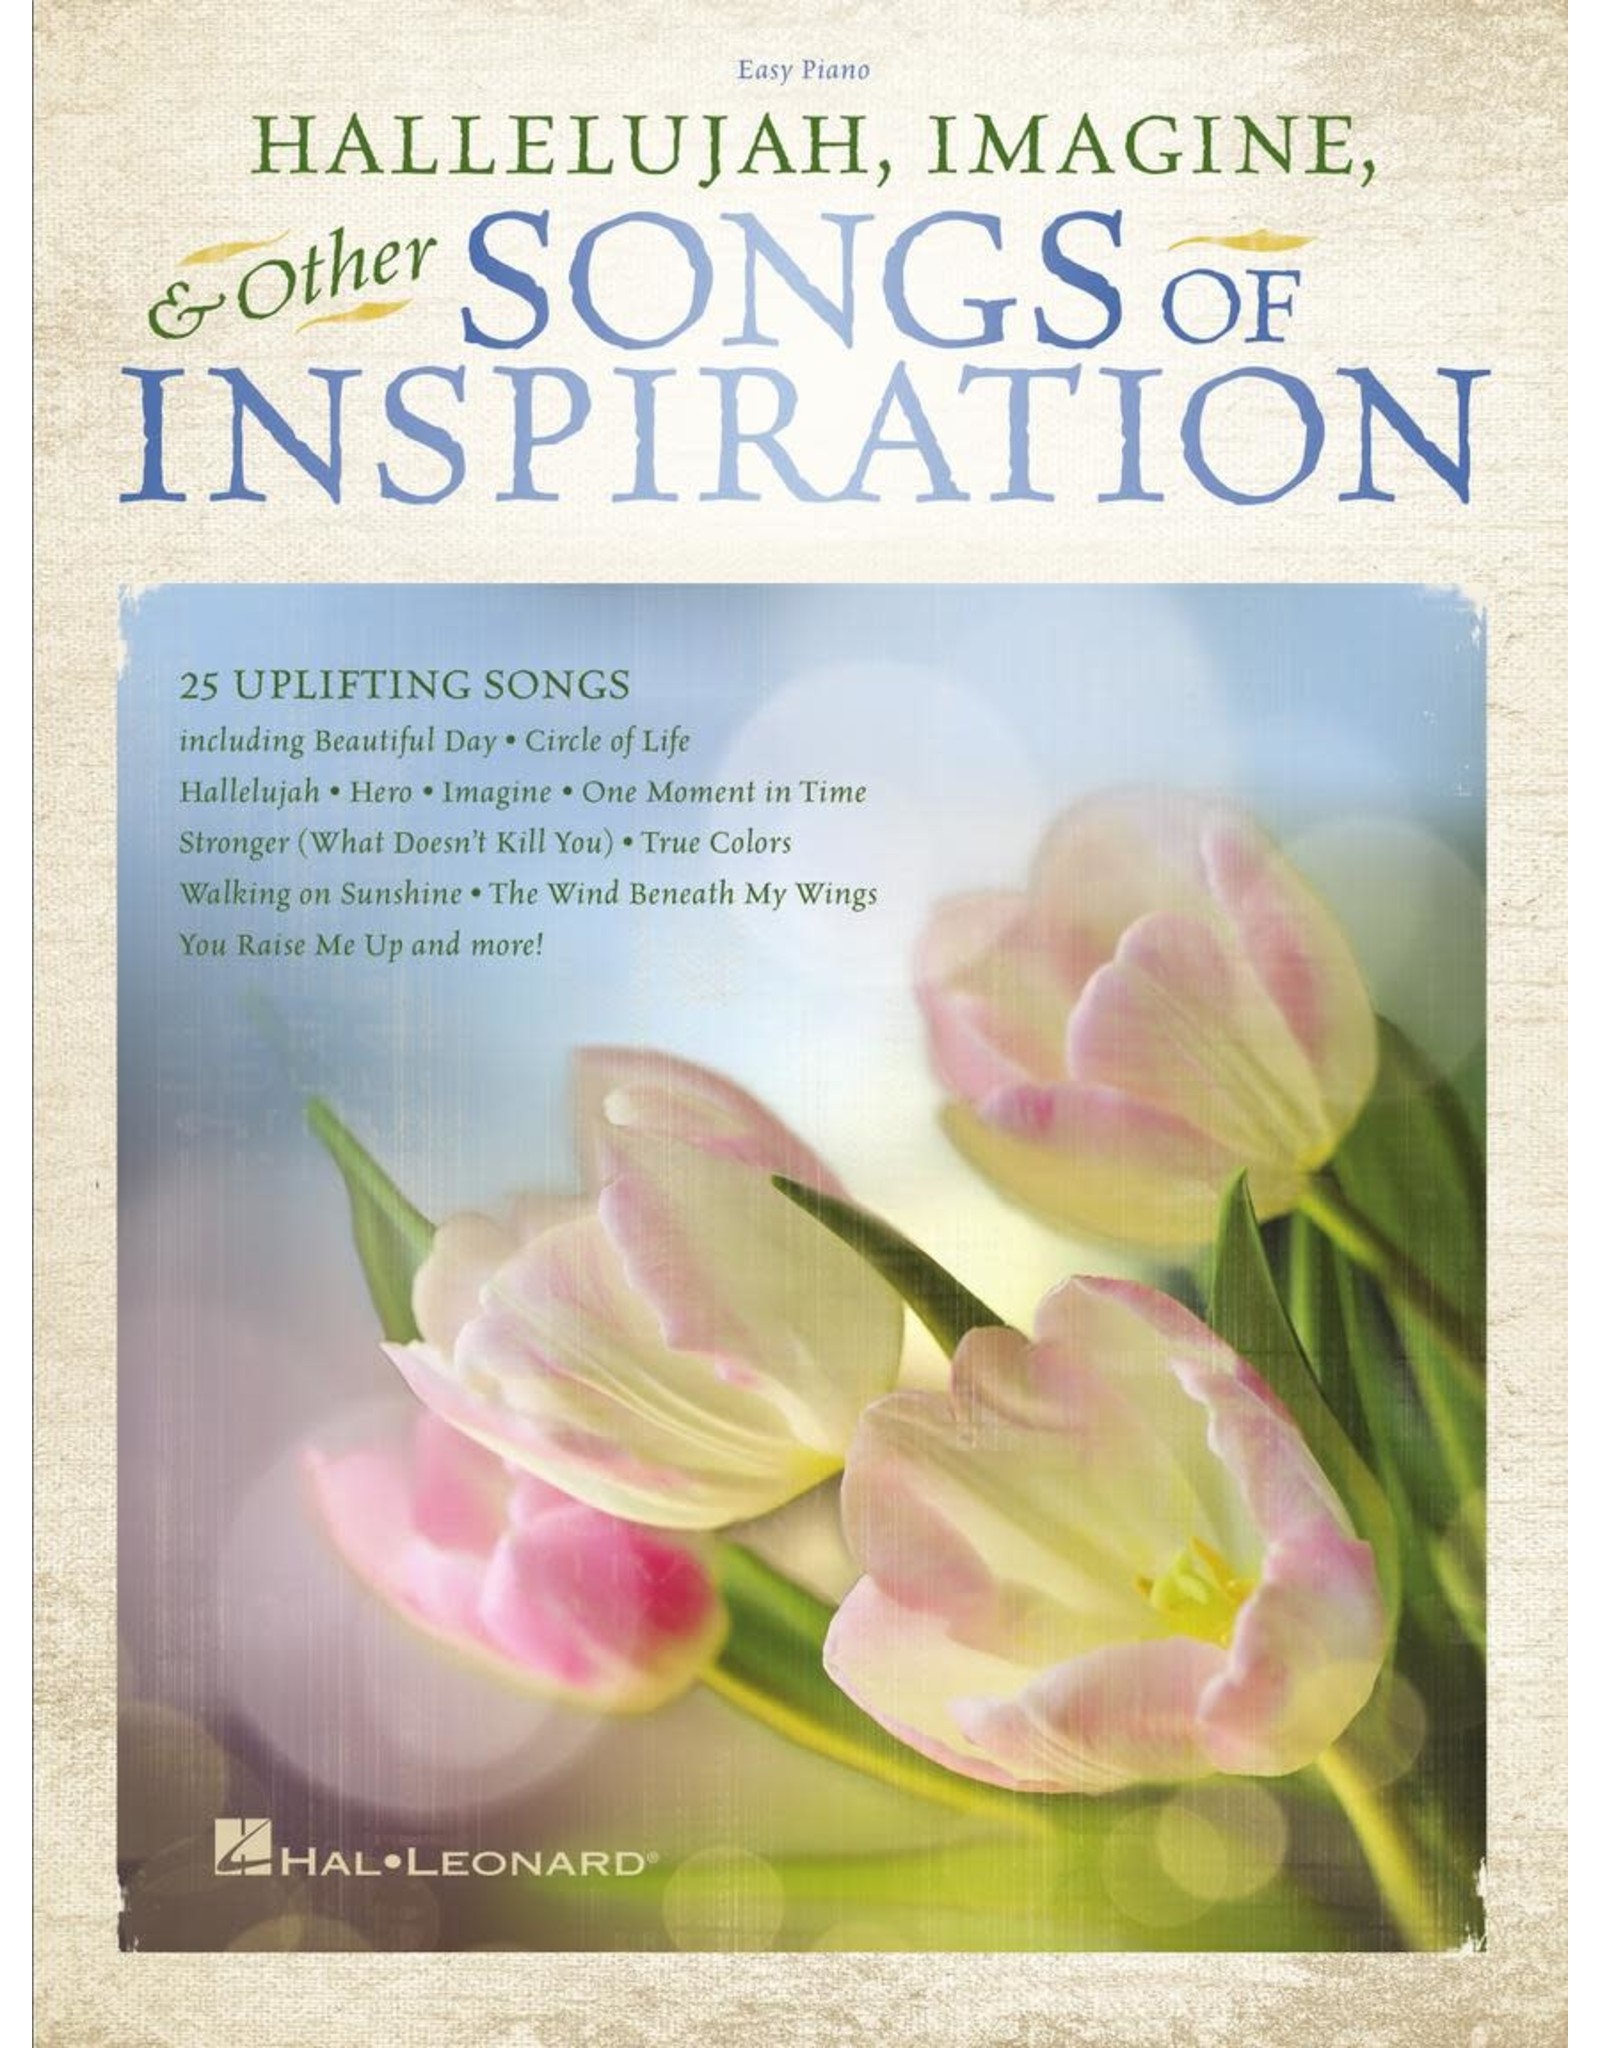 Hal Leonard Songs of Inspiration (Hallelujah, Imagine and Others) Easy Piano